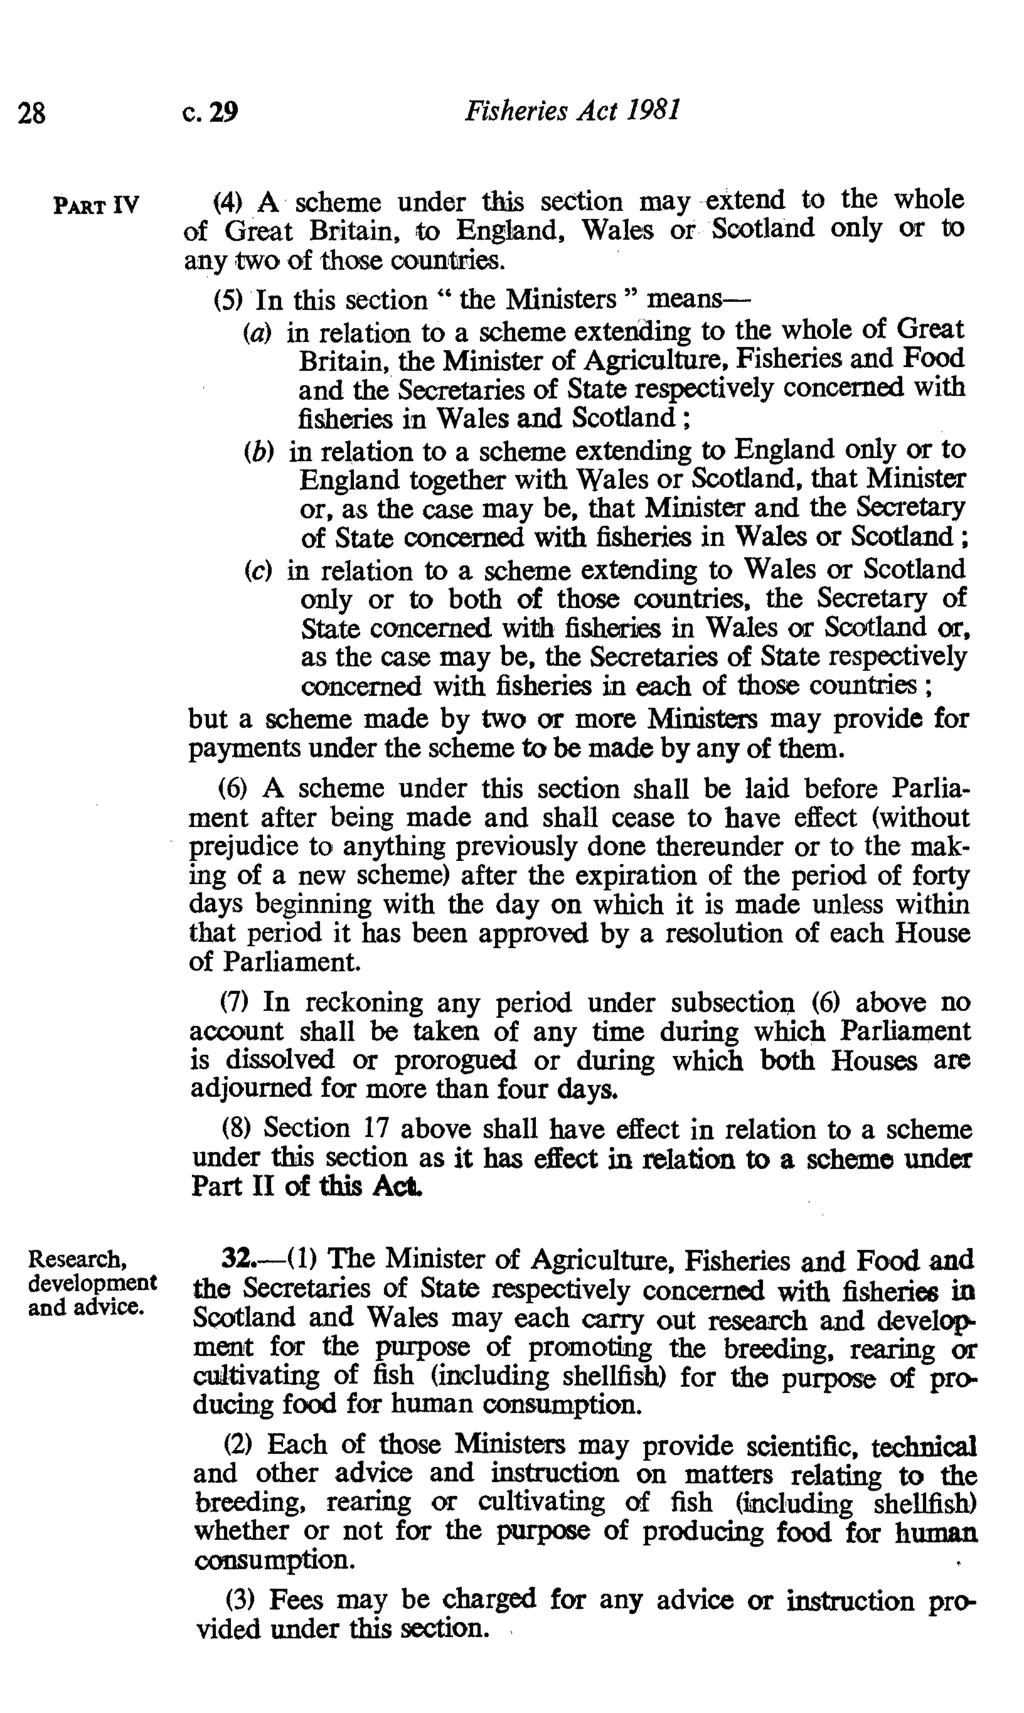 28 c. 29 Fisheries Act 1981 PART IV (4) A scheme under this section may extend to the whole of Great Britain, to England, Wales or Scotland only or to any two of those countries.